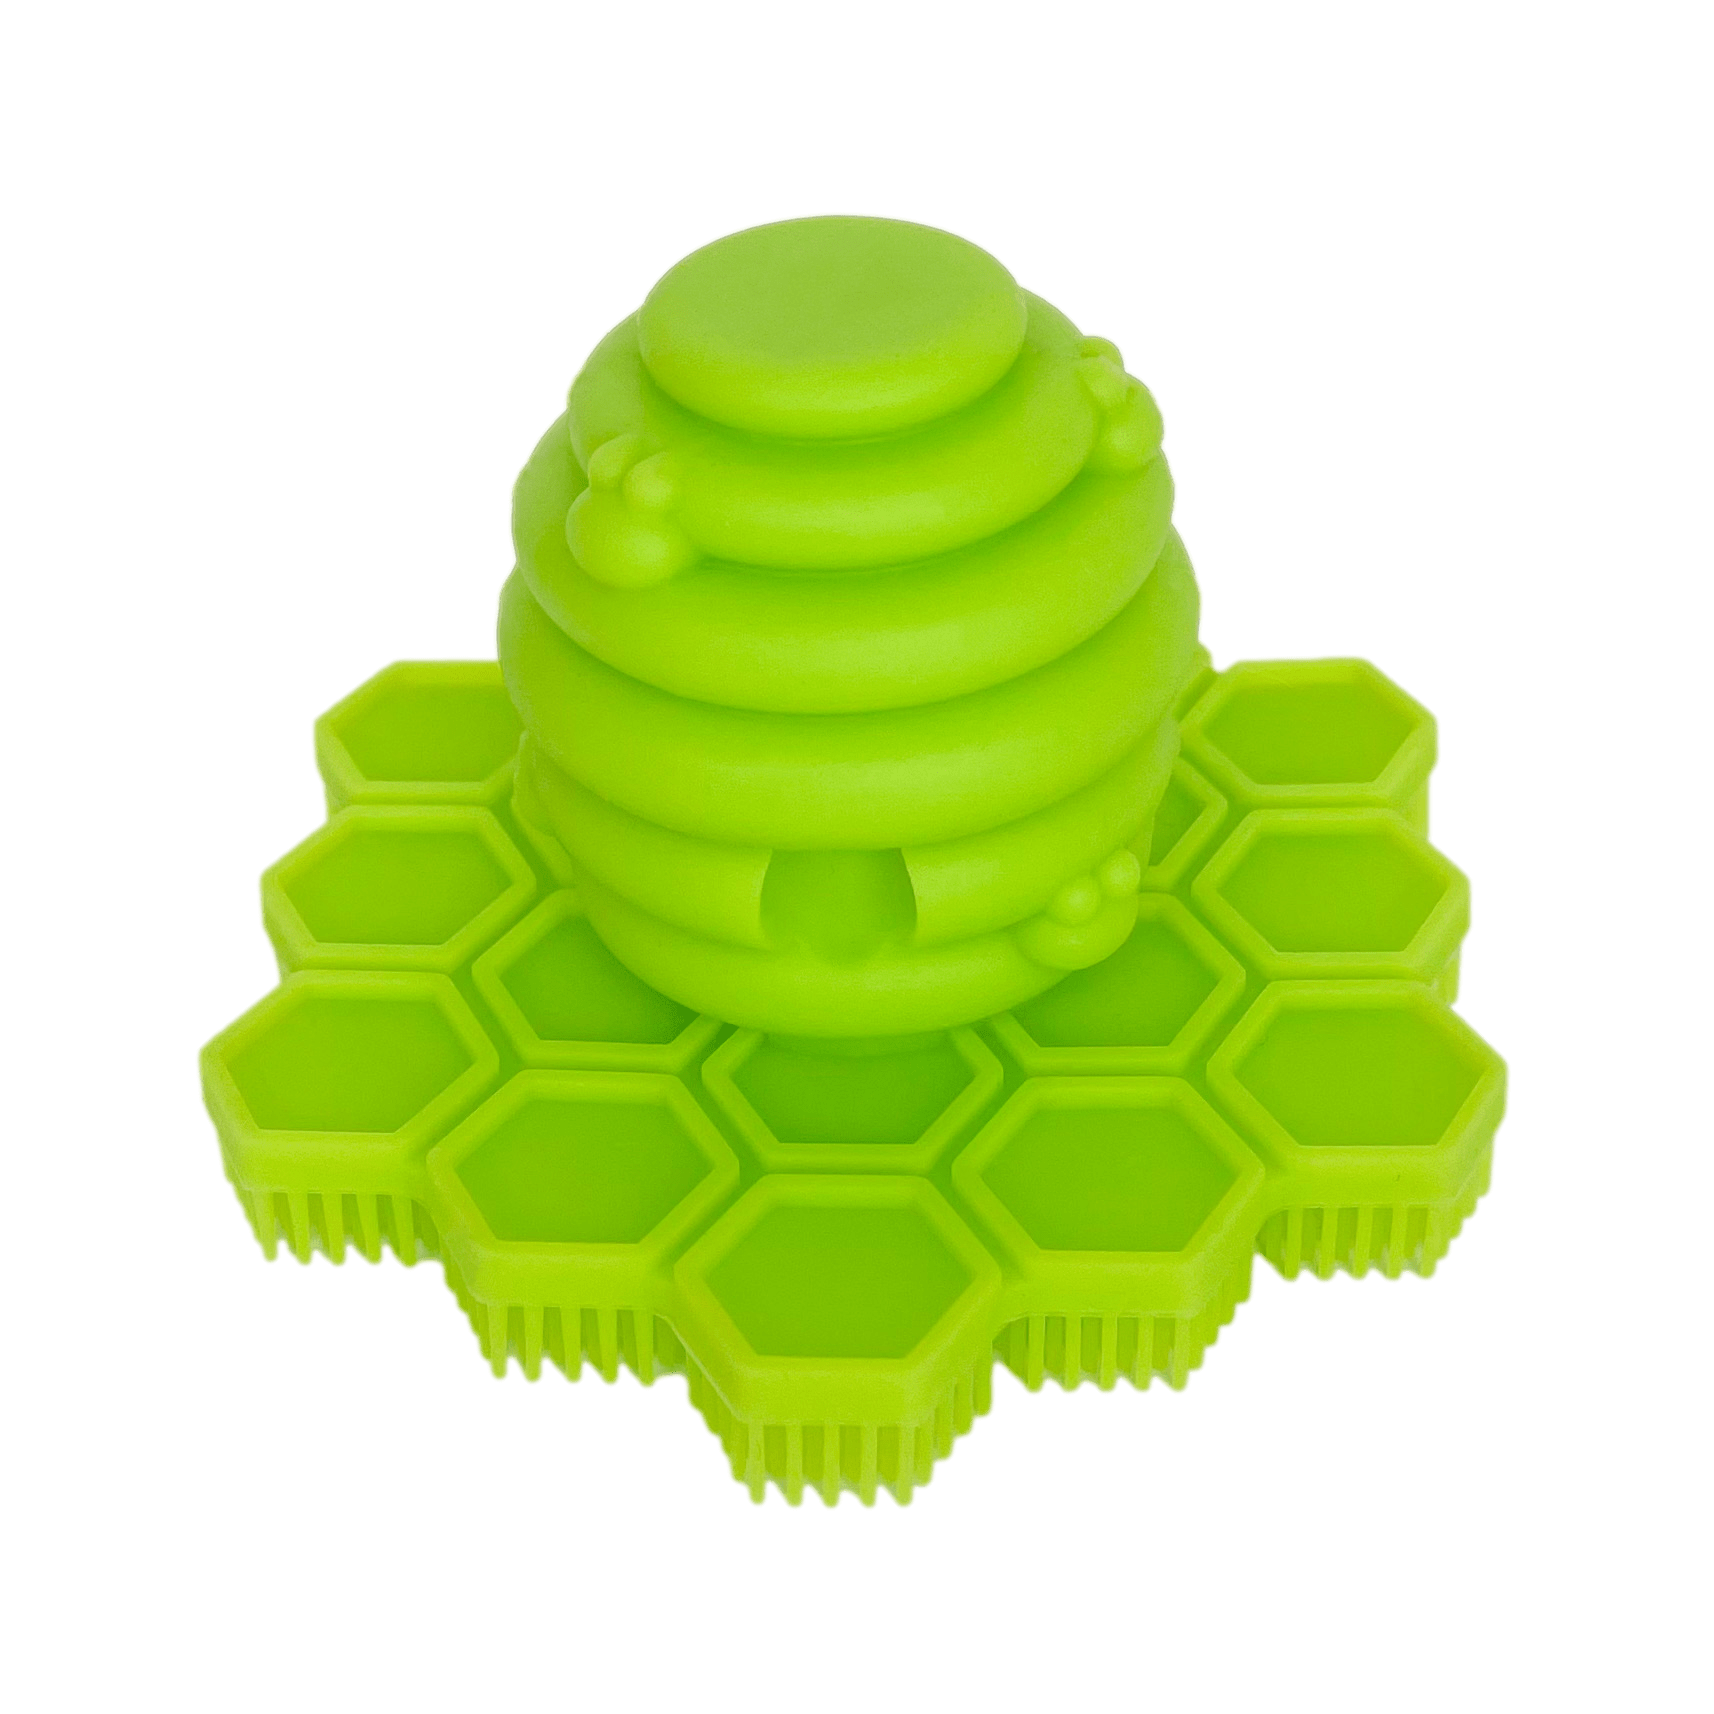 Big Bee, Little Bee ScrubBEE Silicone Body Scrubber for Infants